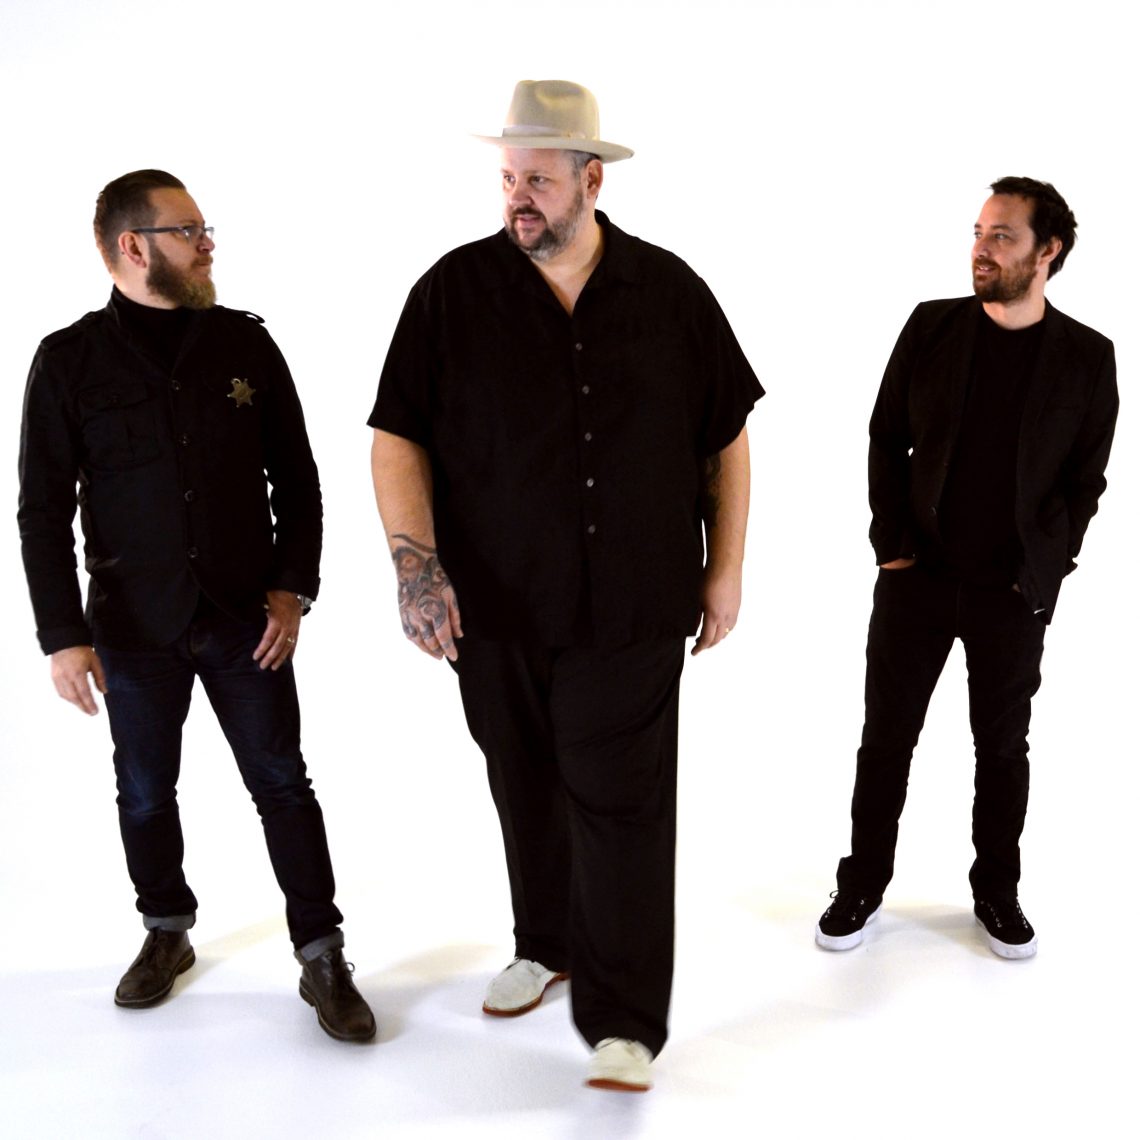 Big Boy Bloater & The LiMiTs announce new album ‘Pills’ – Out June 15th